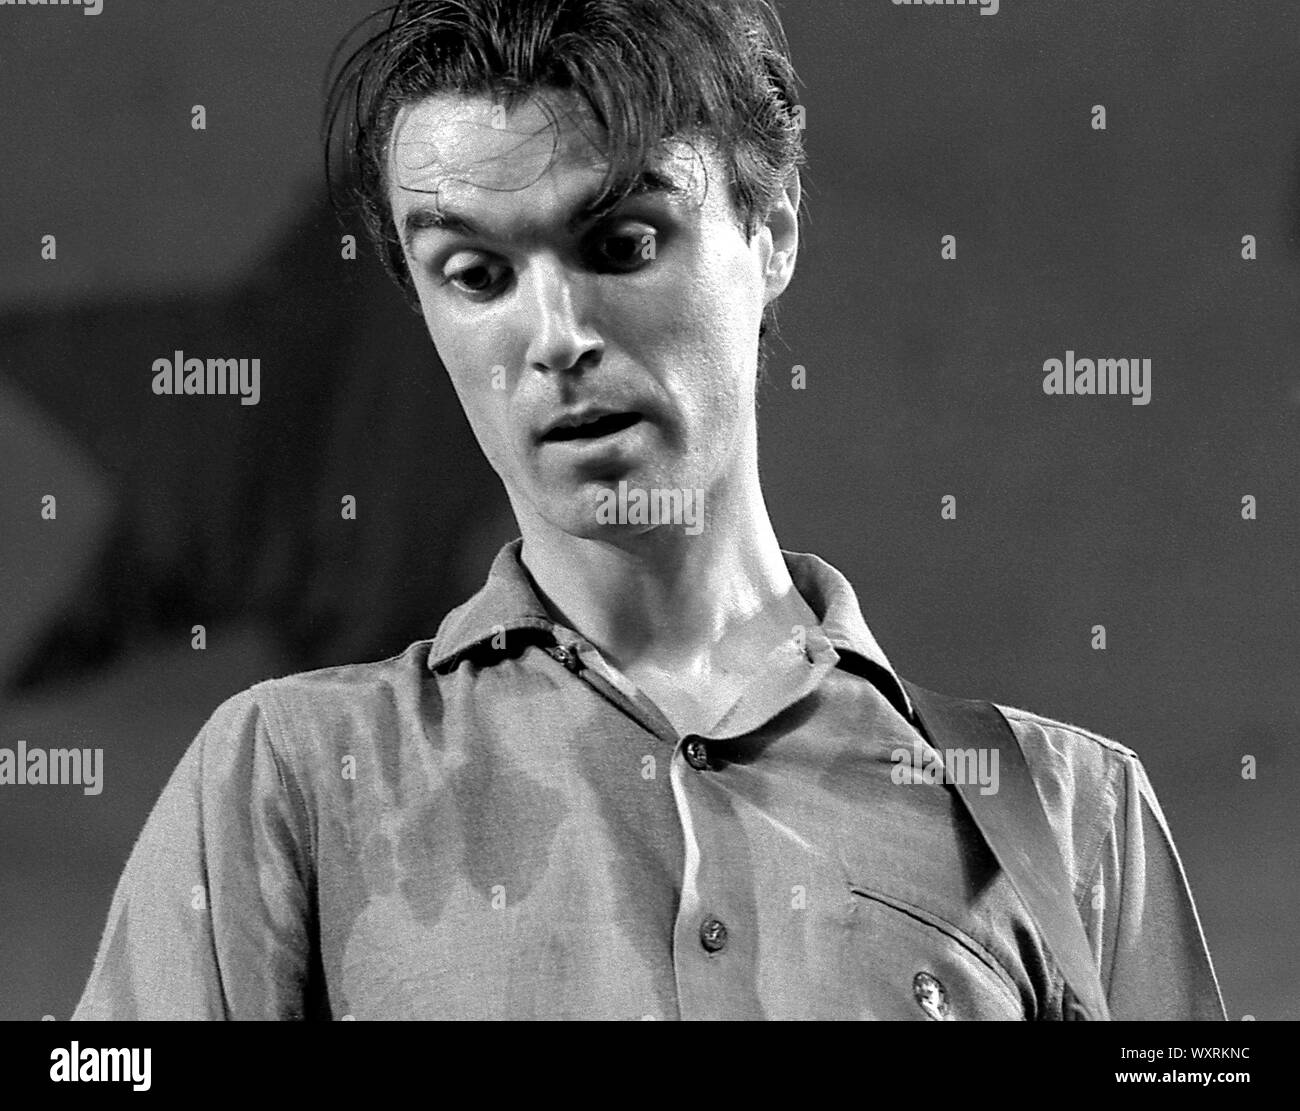 David Byrne of the music group Talking Heads performs onstage in Central Park in New York City in August, 1979. Stock Photo